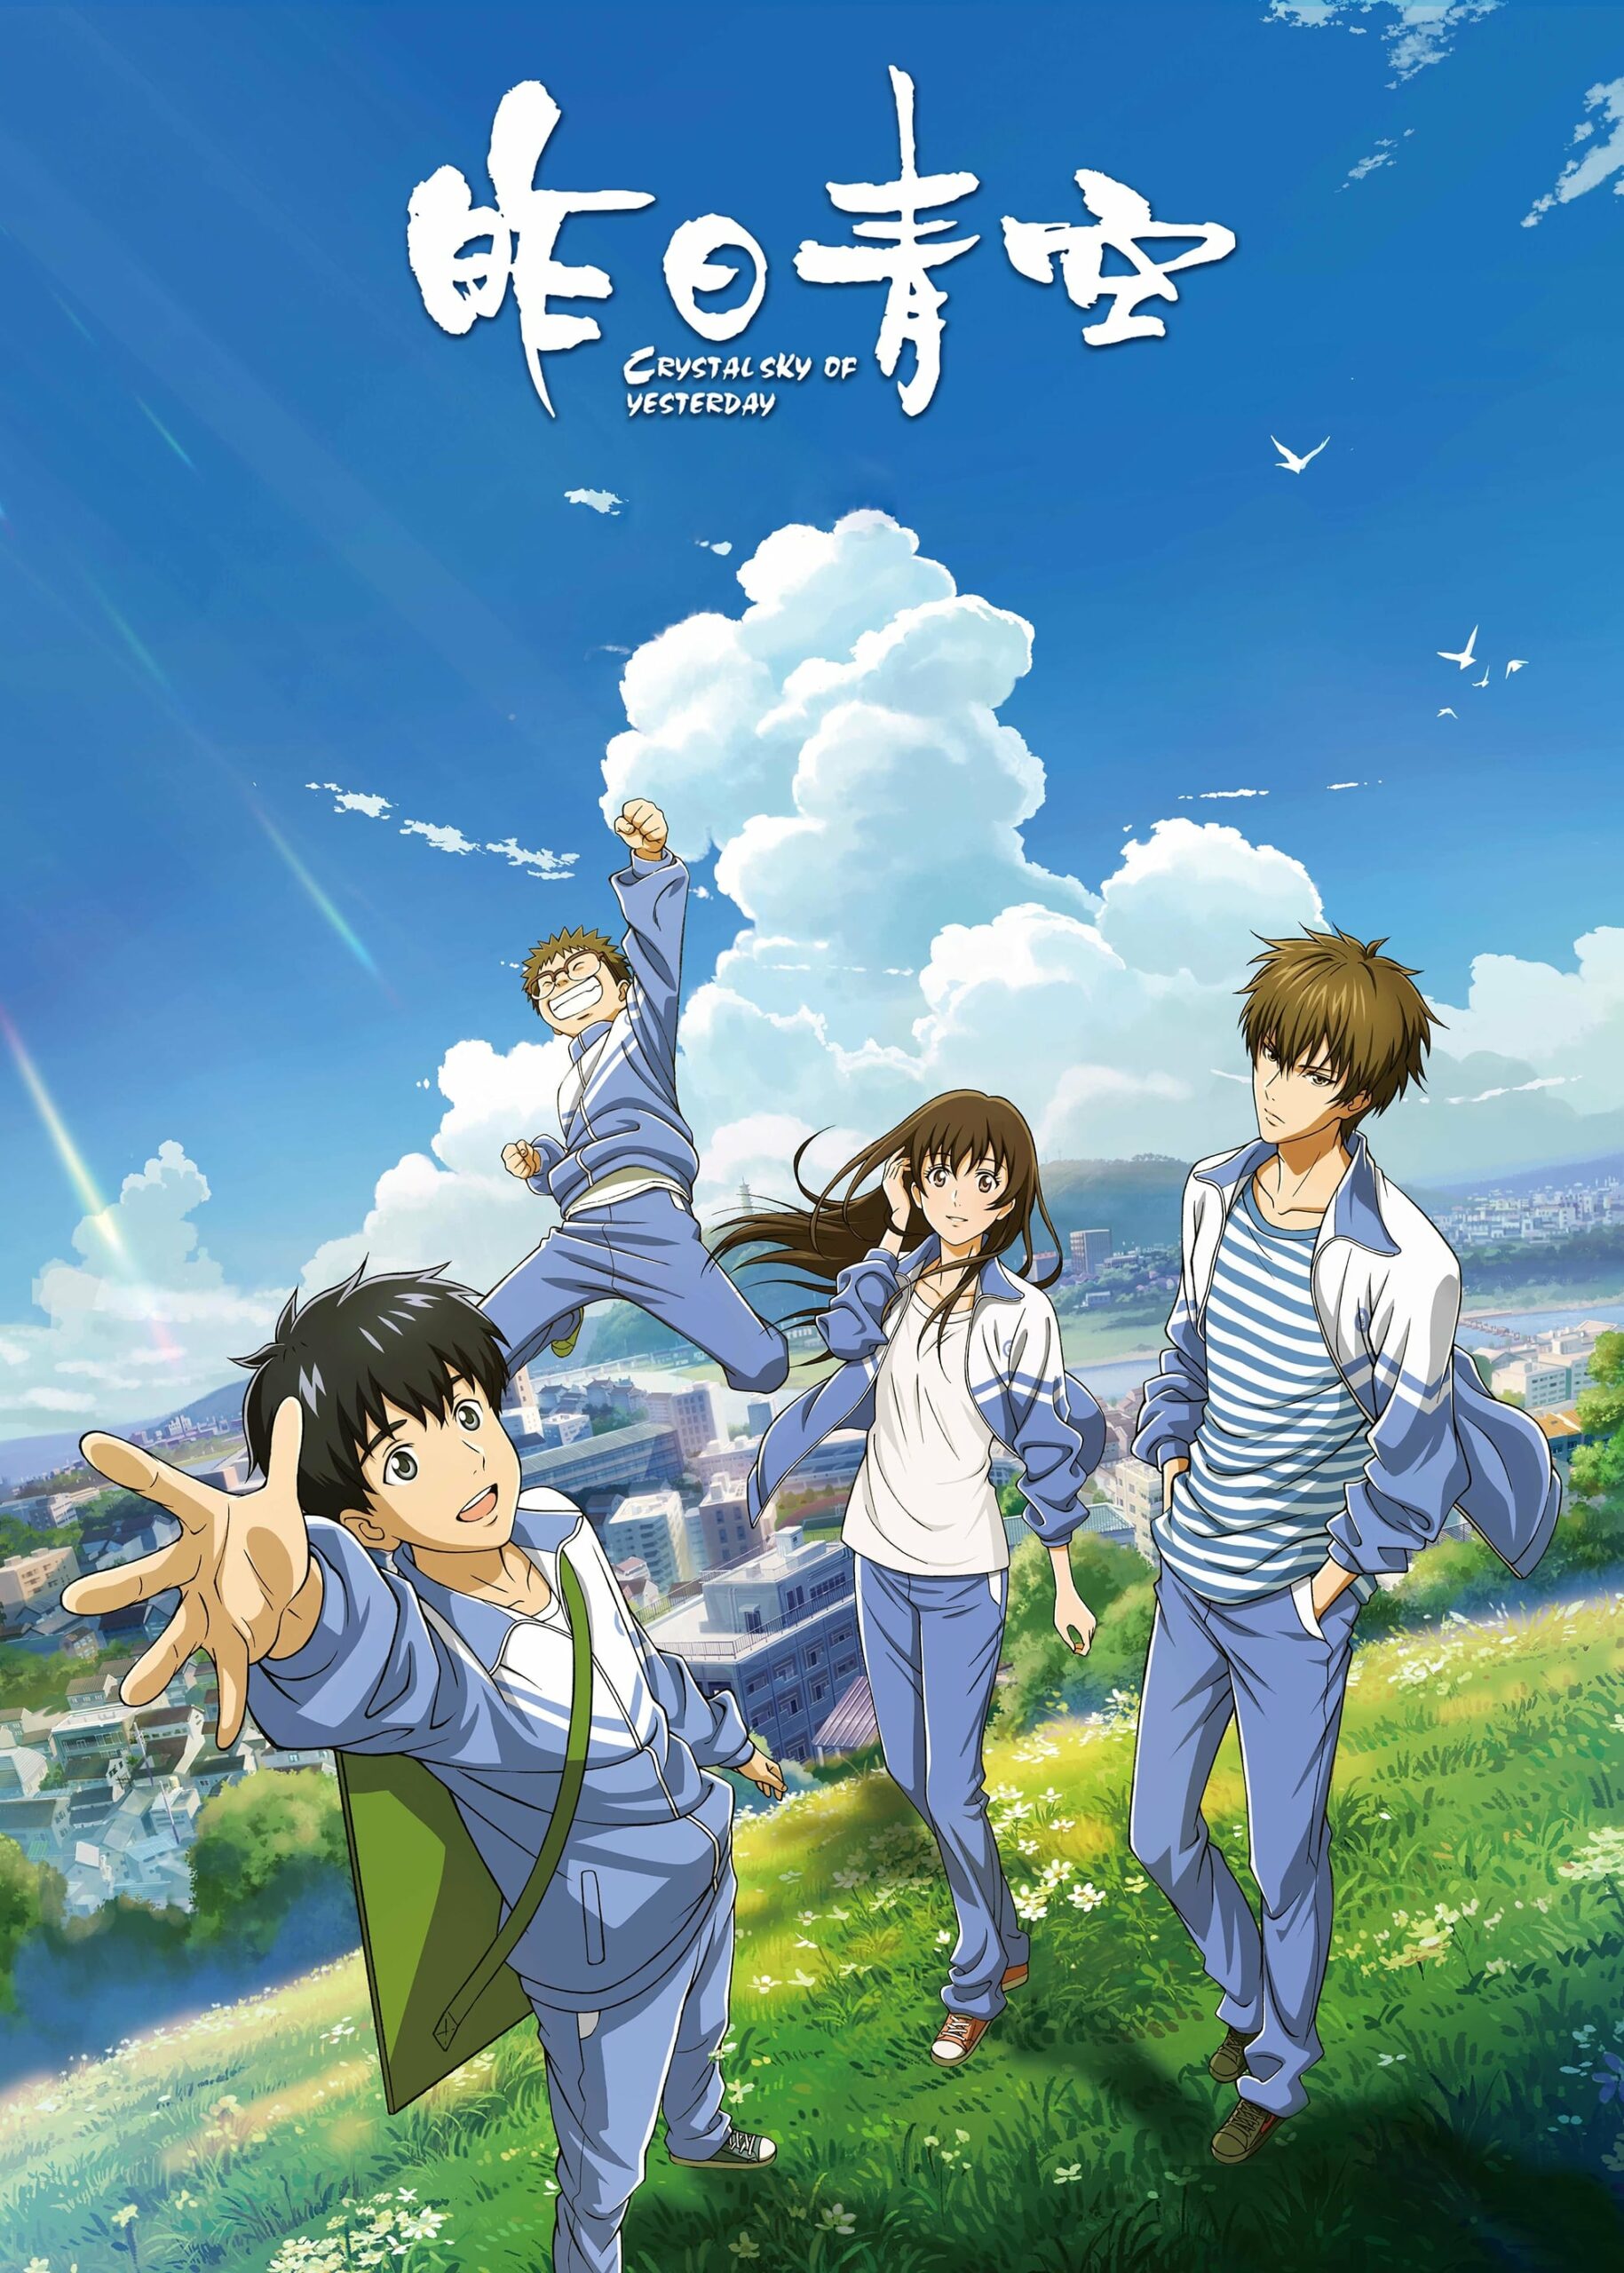 Poster for the movie "Crystal Sky of Yesterday"